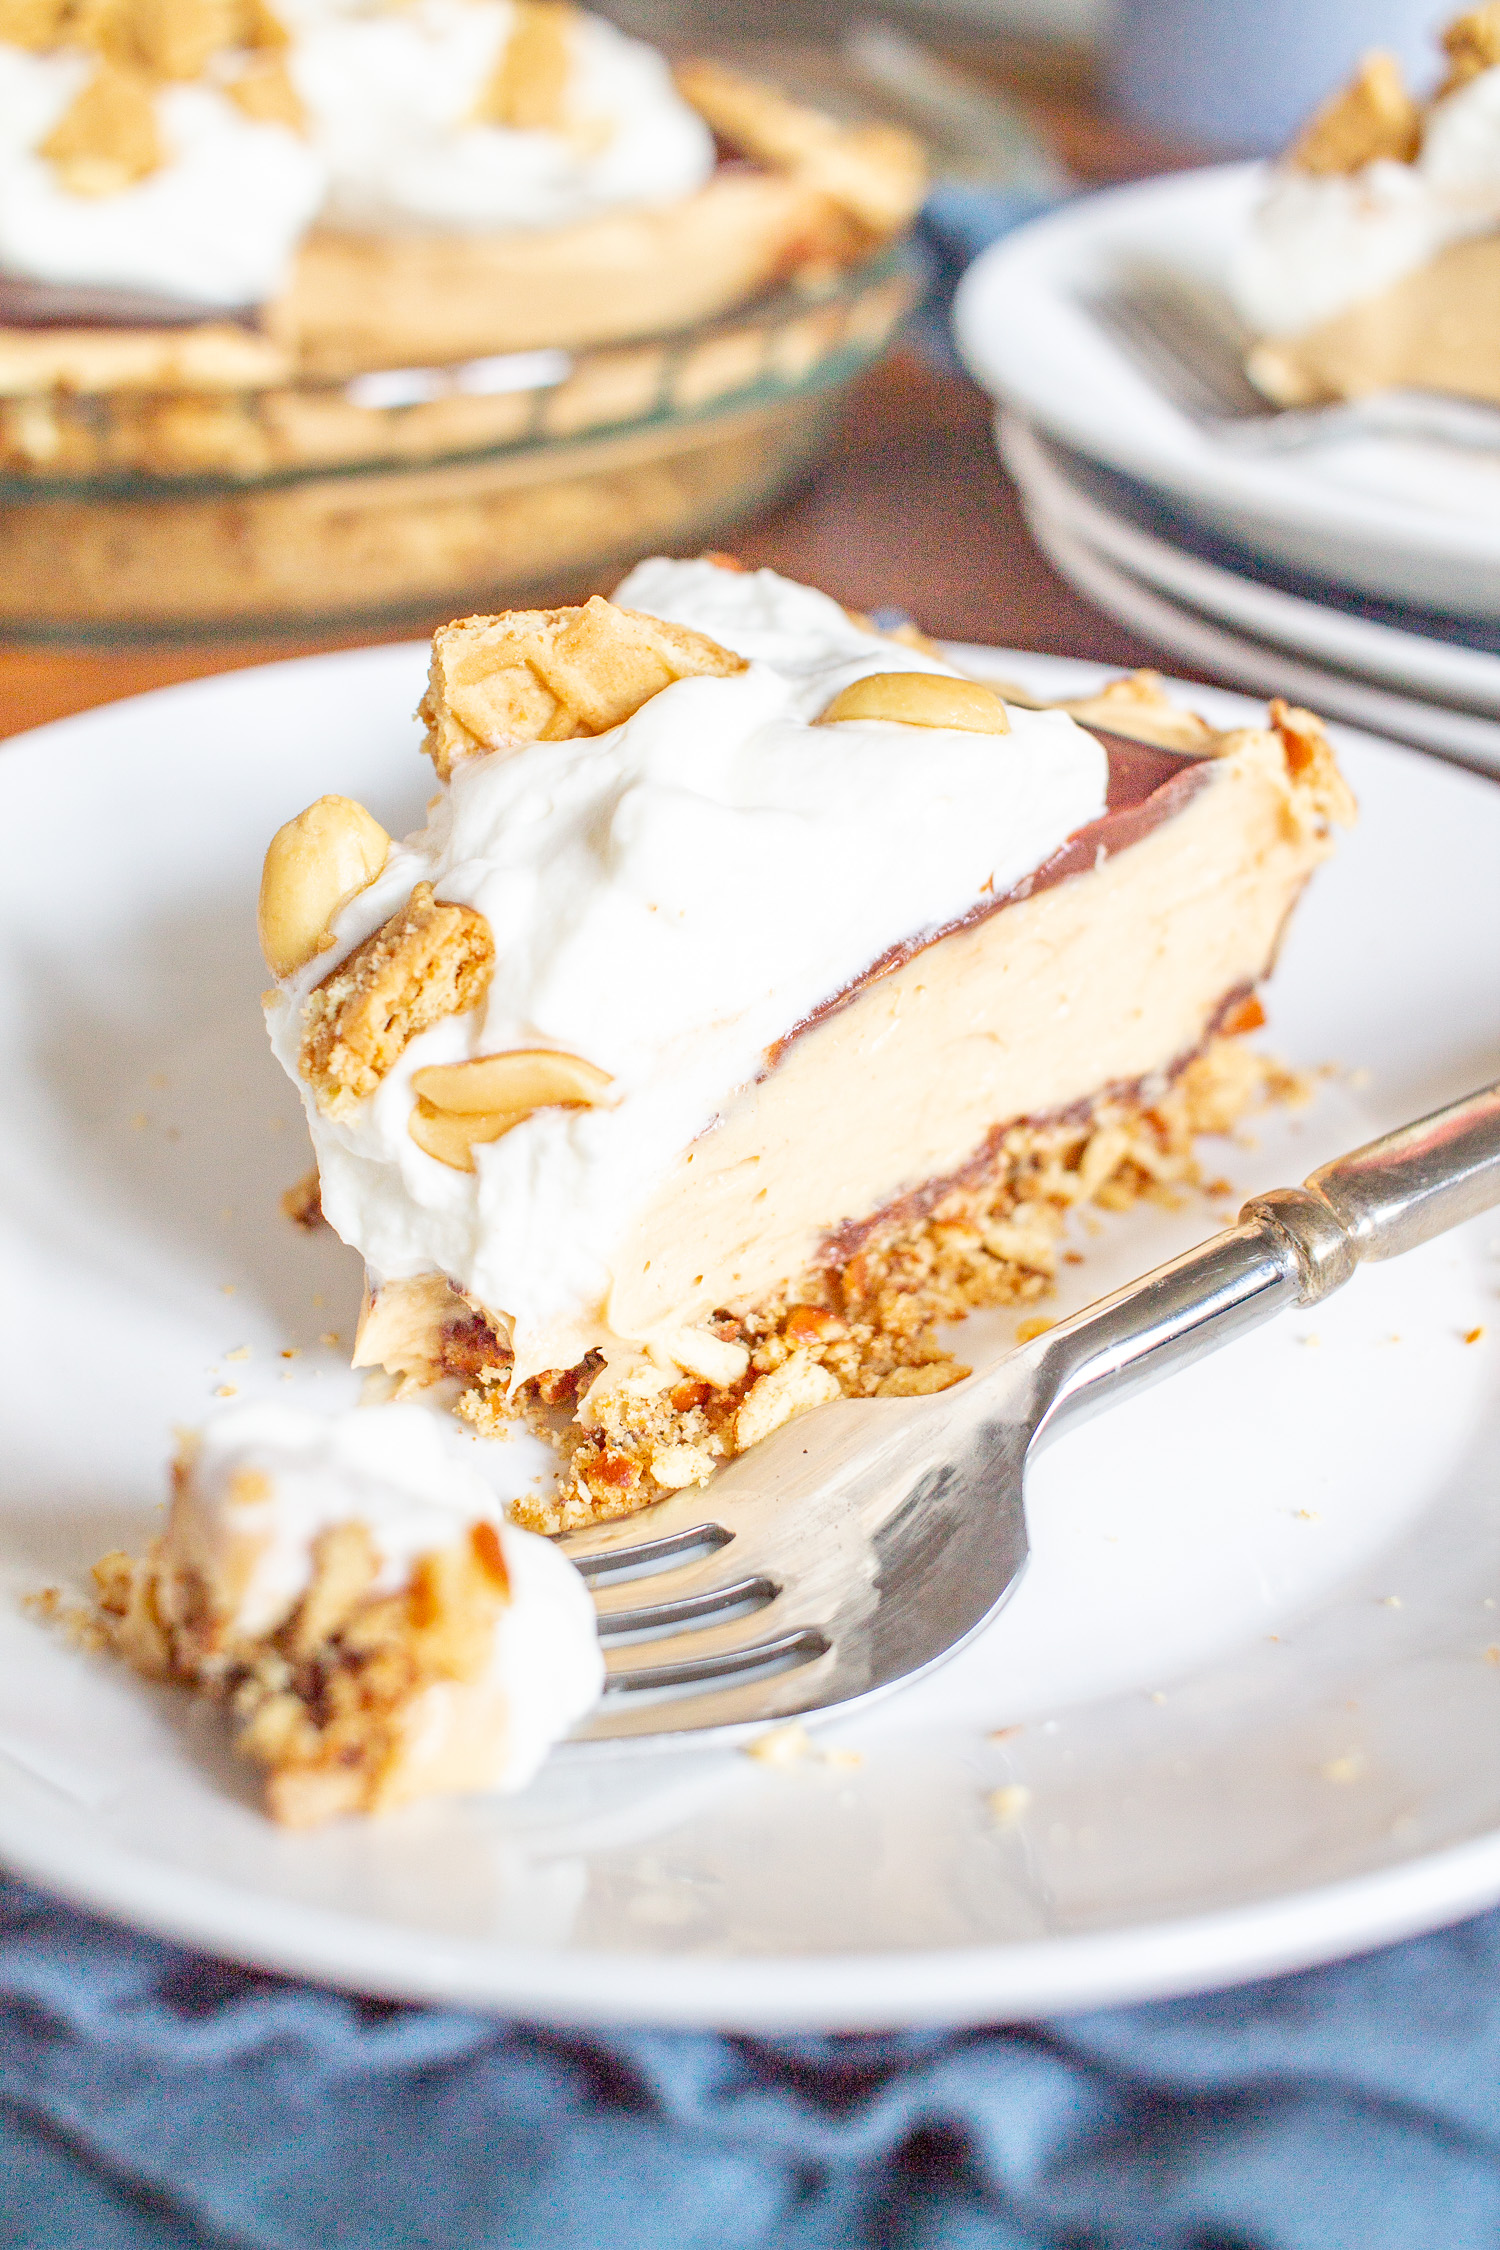 Chocolate Peanut Butter Pie | An Easy Recipe for Peanut Butter Pie with ...